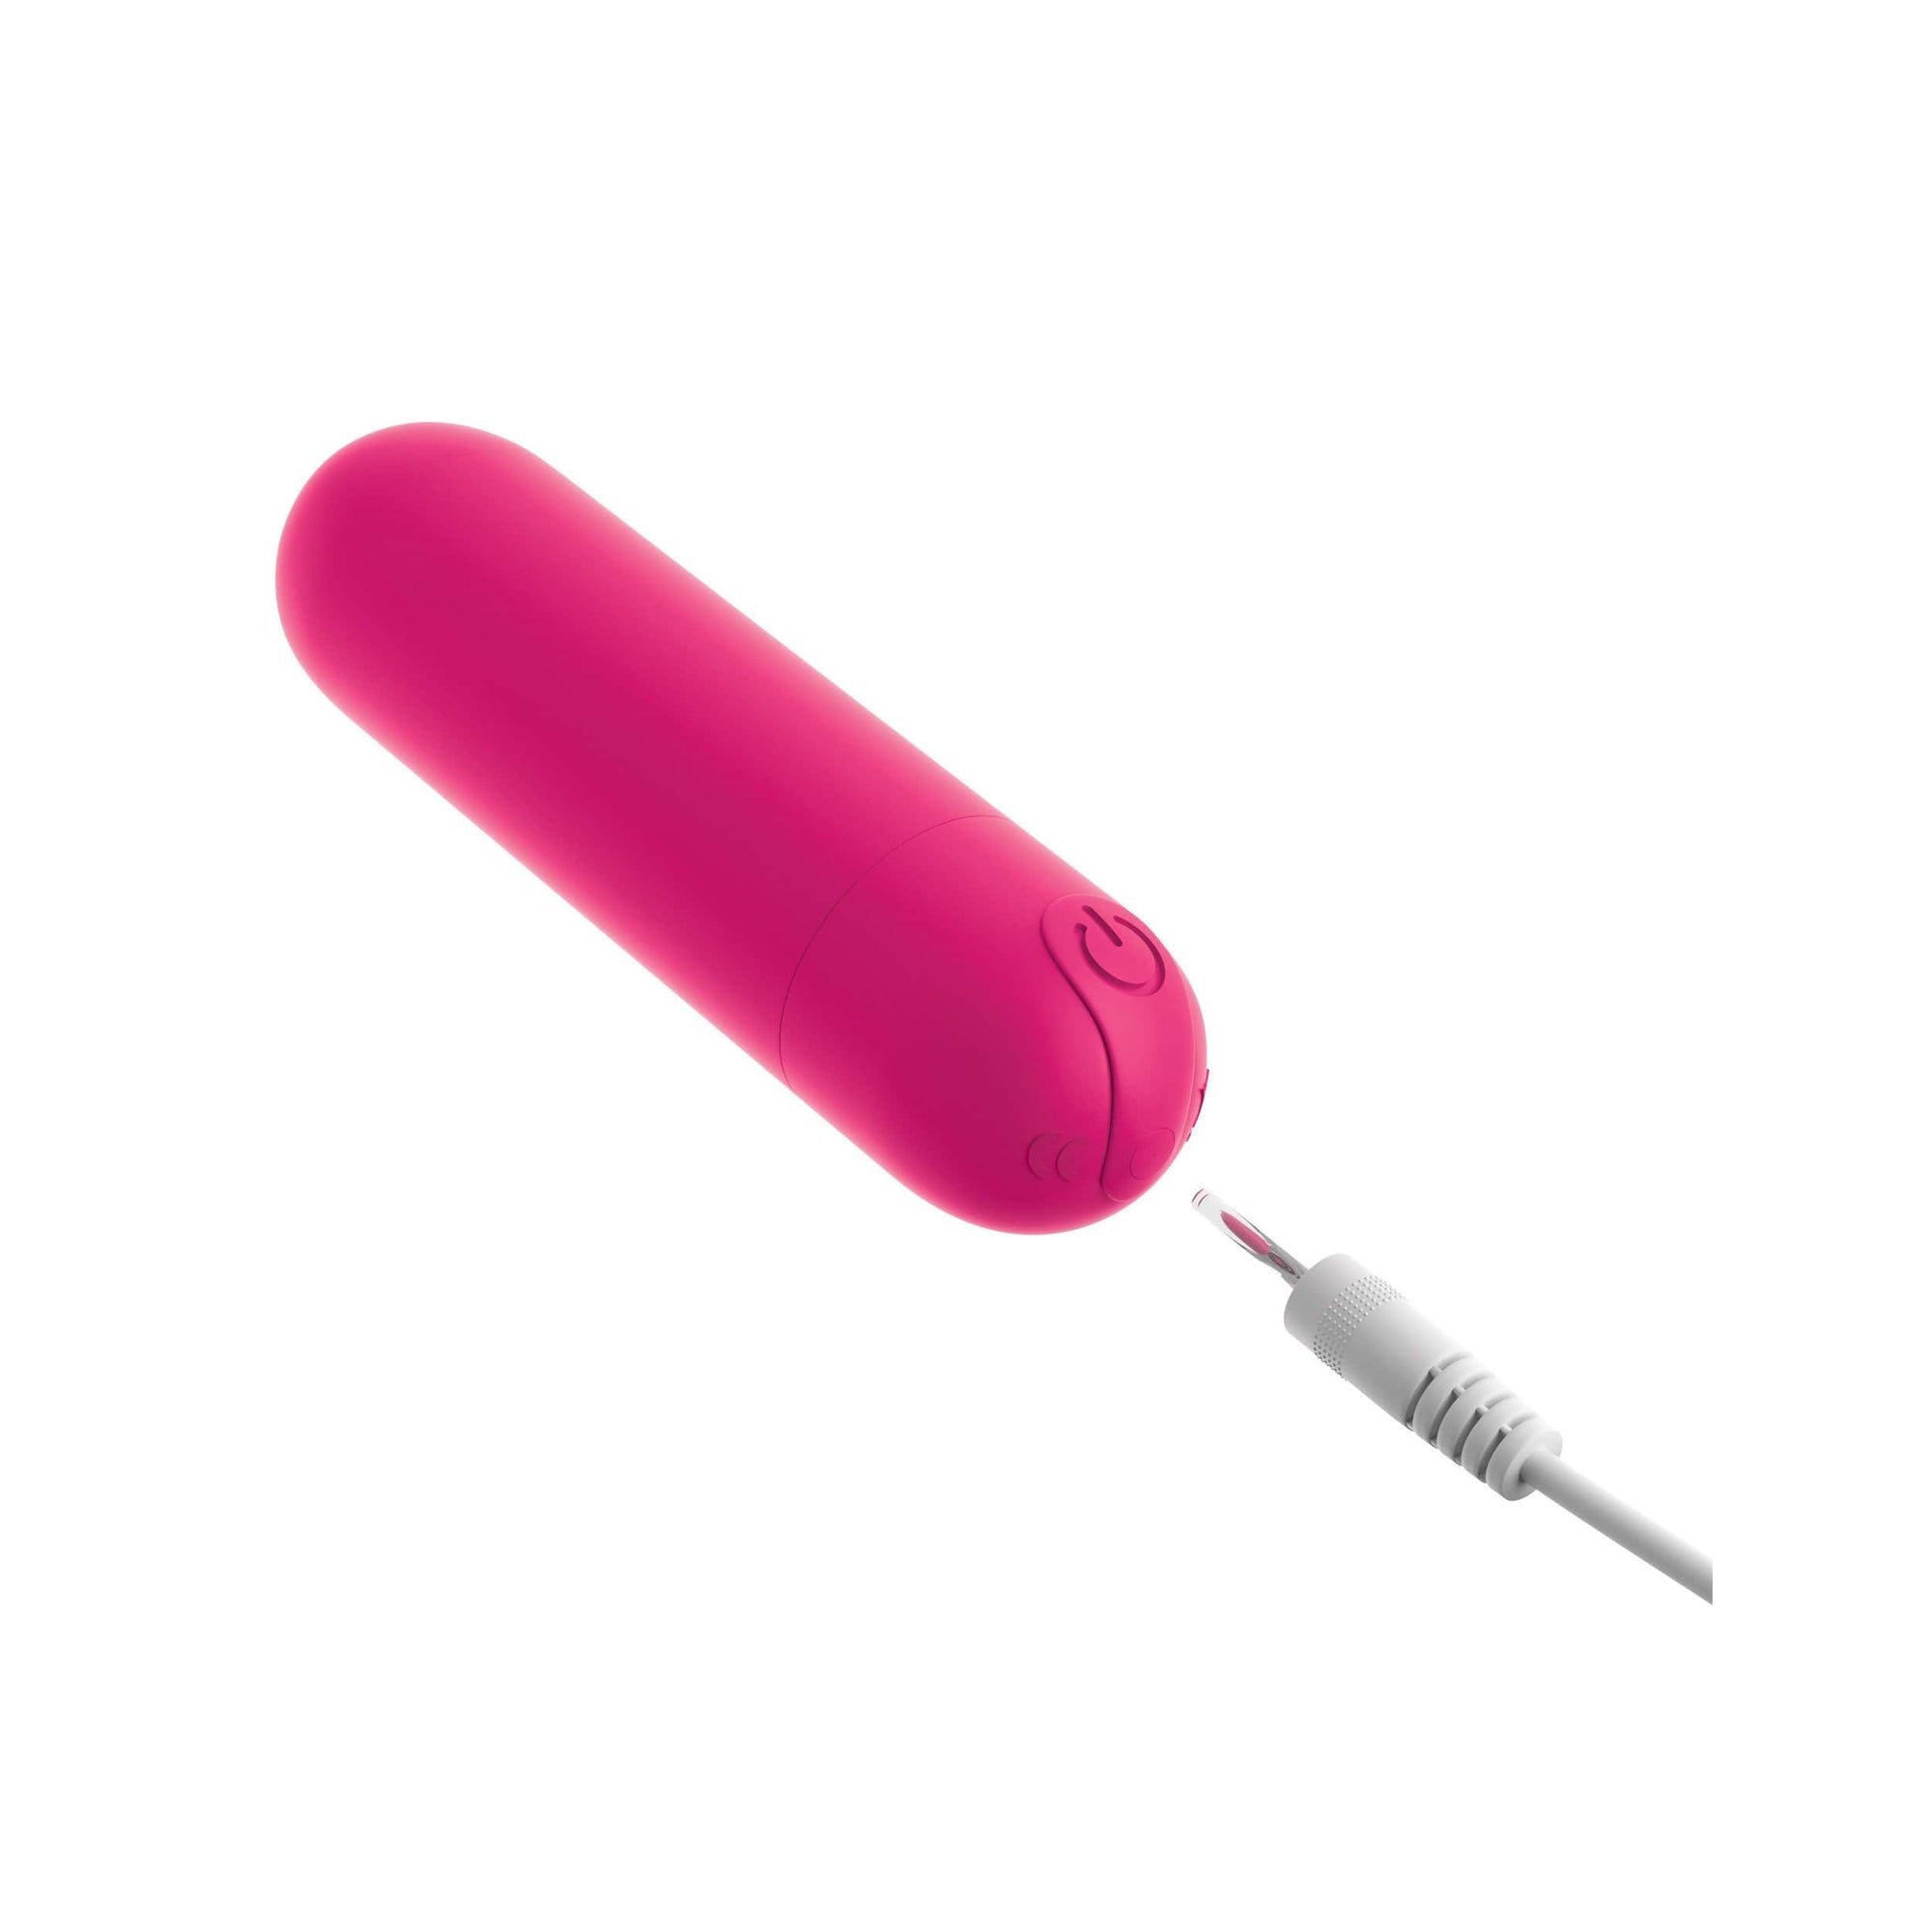 Pipedream - OMG Bullets #Play Rechargeable Bullet Vibrator (Fuschia) Bullet (Vibration) Rechargeable 319767185 CherryAffairs